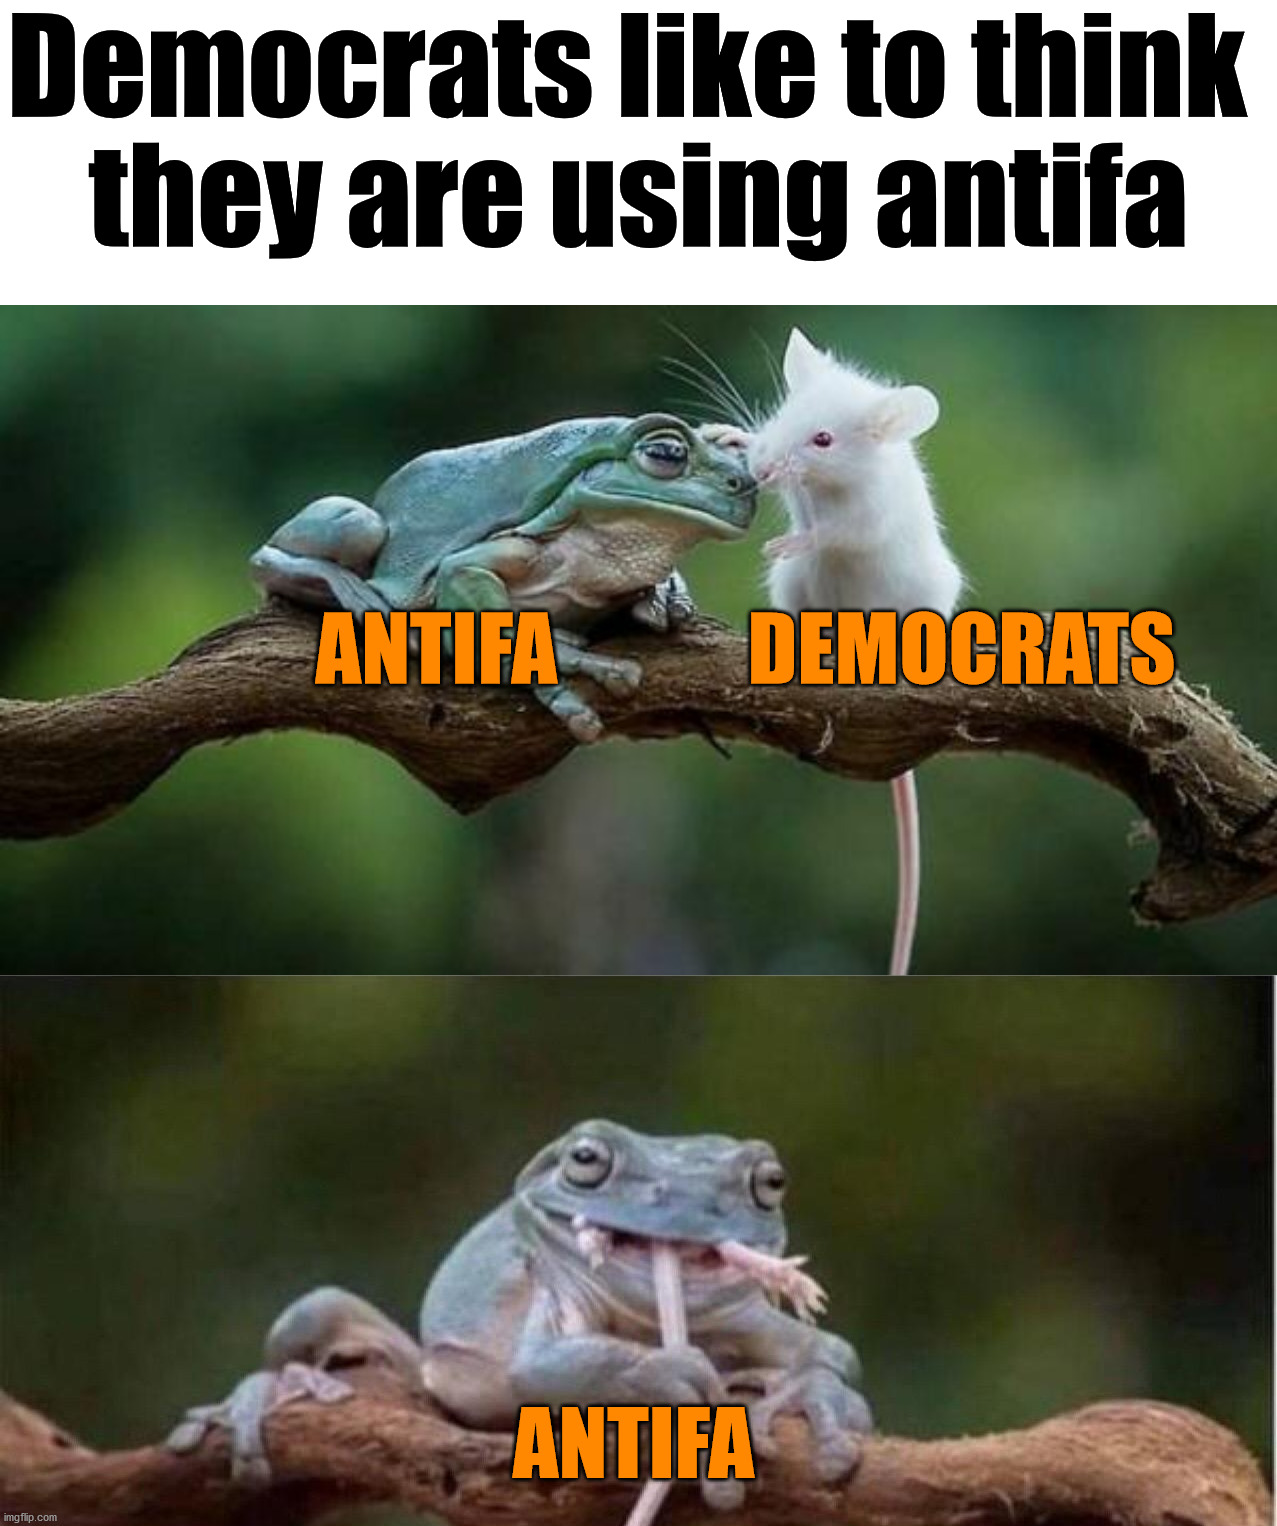 Democrats are being eaten by Socialist groups like antifa, BLM, ELF, ALF and others. | Democrats like to think 
they are using antifa; ANTIFA            DEMOCRATS; ANTIFA | image tagged in socialism,antifa,blm,elf,alf | made w/ Imgflip meme maker